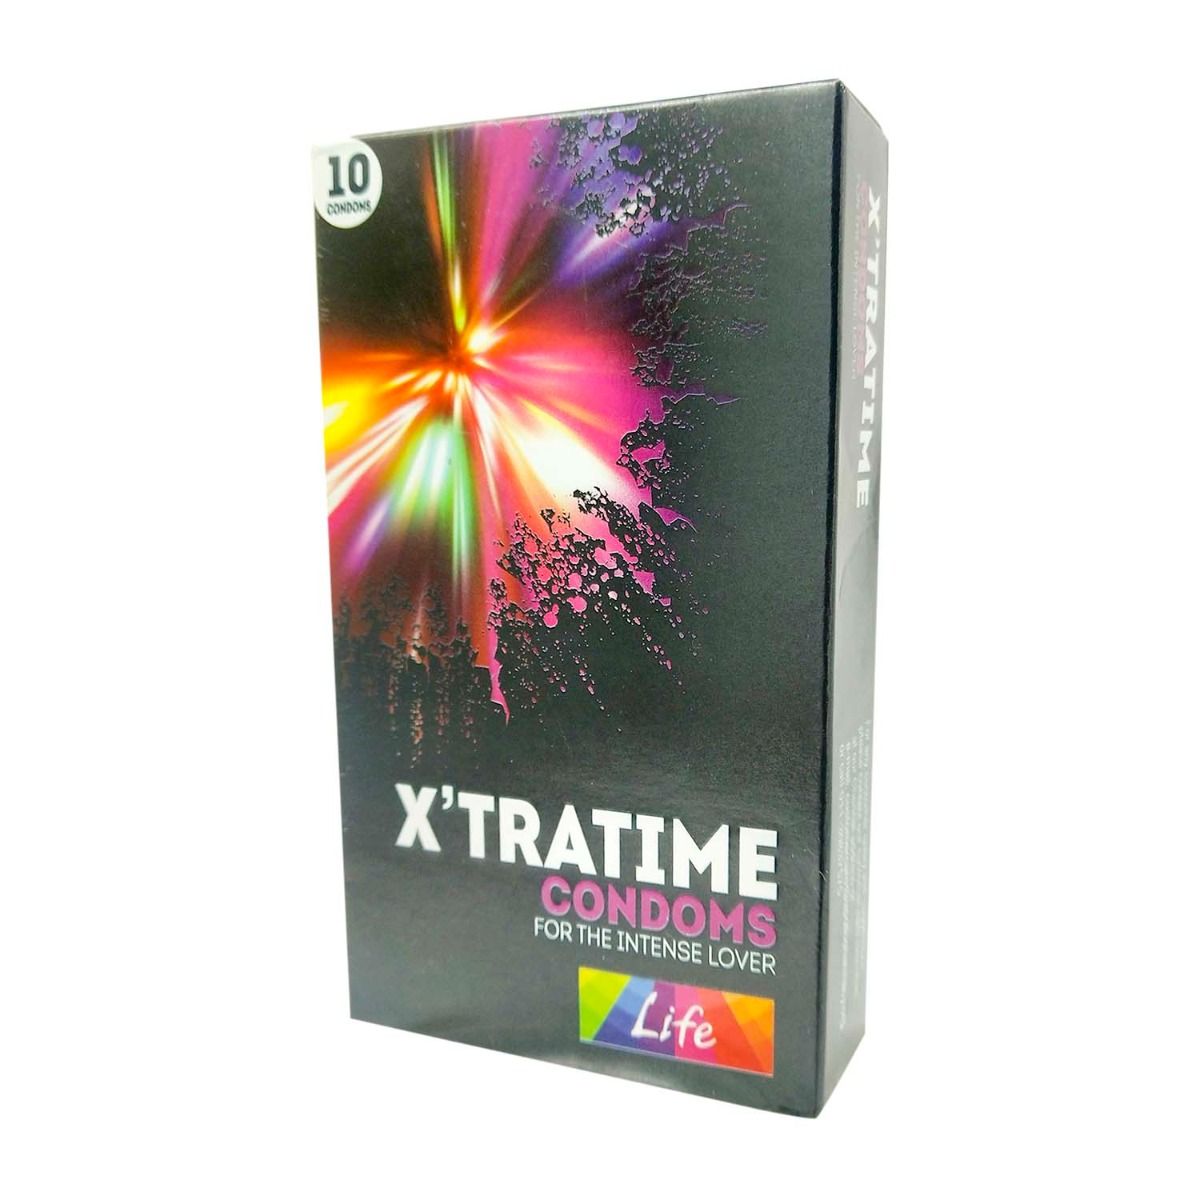 Apollo Life X'tra Time Condoms, 10 Count, Pack of 1 